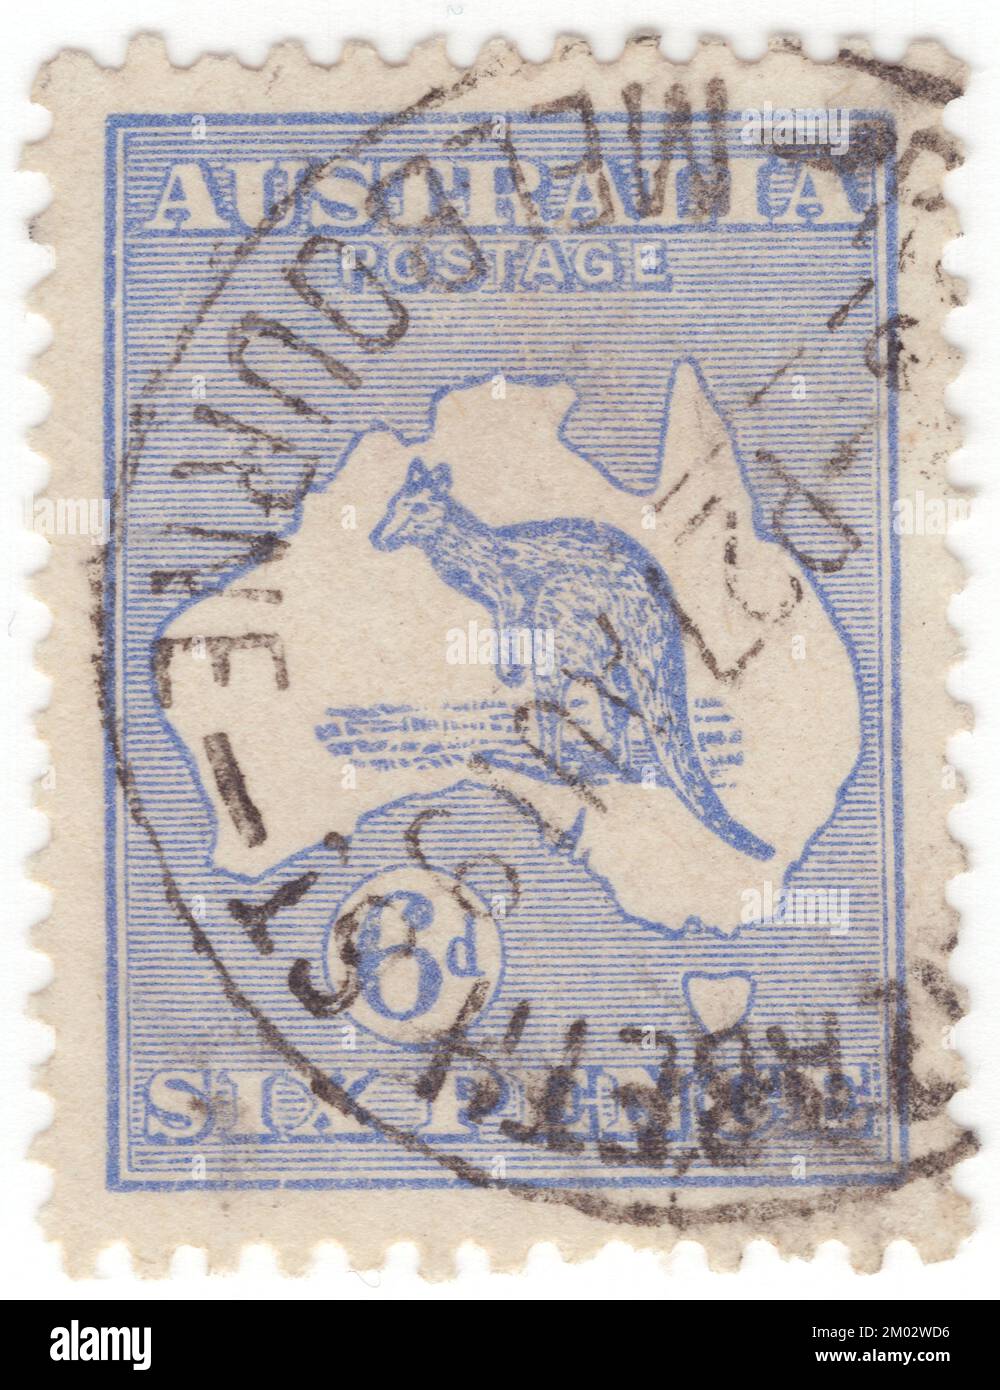 AUSTRALIA — 1913: An 6 pences ultramarine postage stamp depicting Kangaroo and Map of Australia. Australia is the oldest, flattest, and driest inhabited continent, with the least fertile soils. It is a megadiverse country, and its size gives it a wide variety of landscapes and climates, with deserts in the centre, tropical rainforests in the north-east, and mountain ranges in the south-east. The kangaroo is a recognizable symbol of Australia. First Australian postage stamps issue. The kangaroo and emu feature on the Australian coat of arms Stock Photo